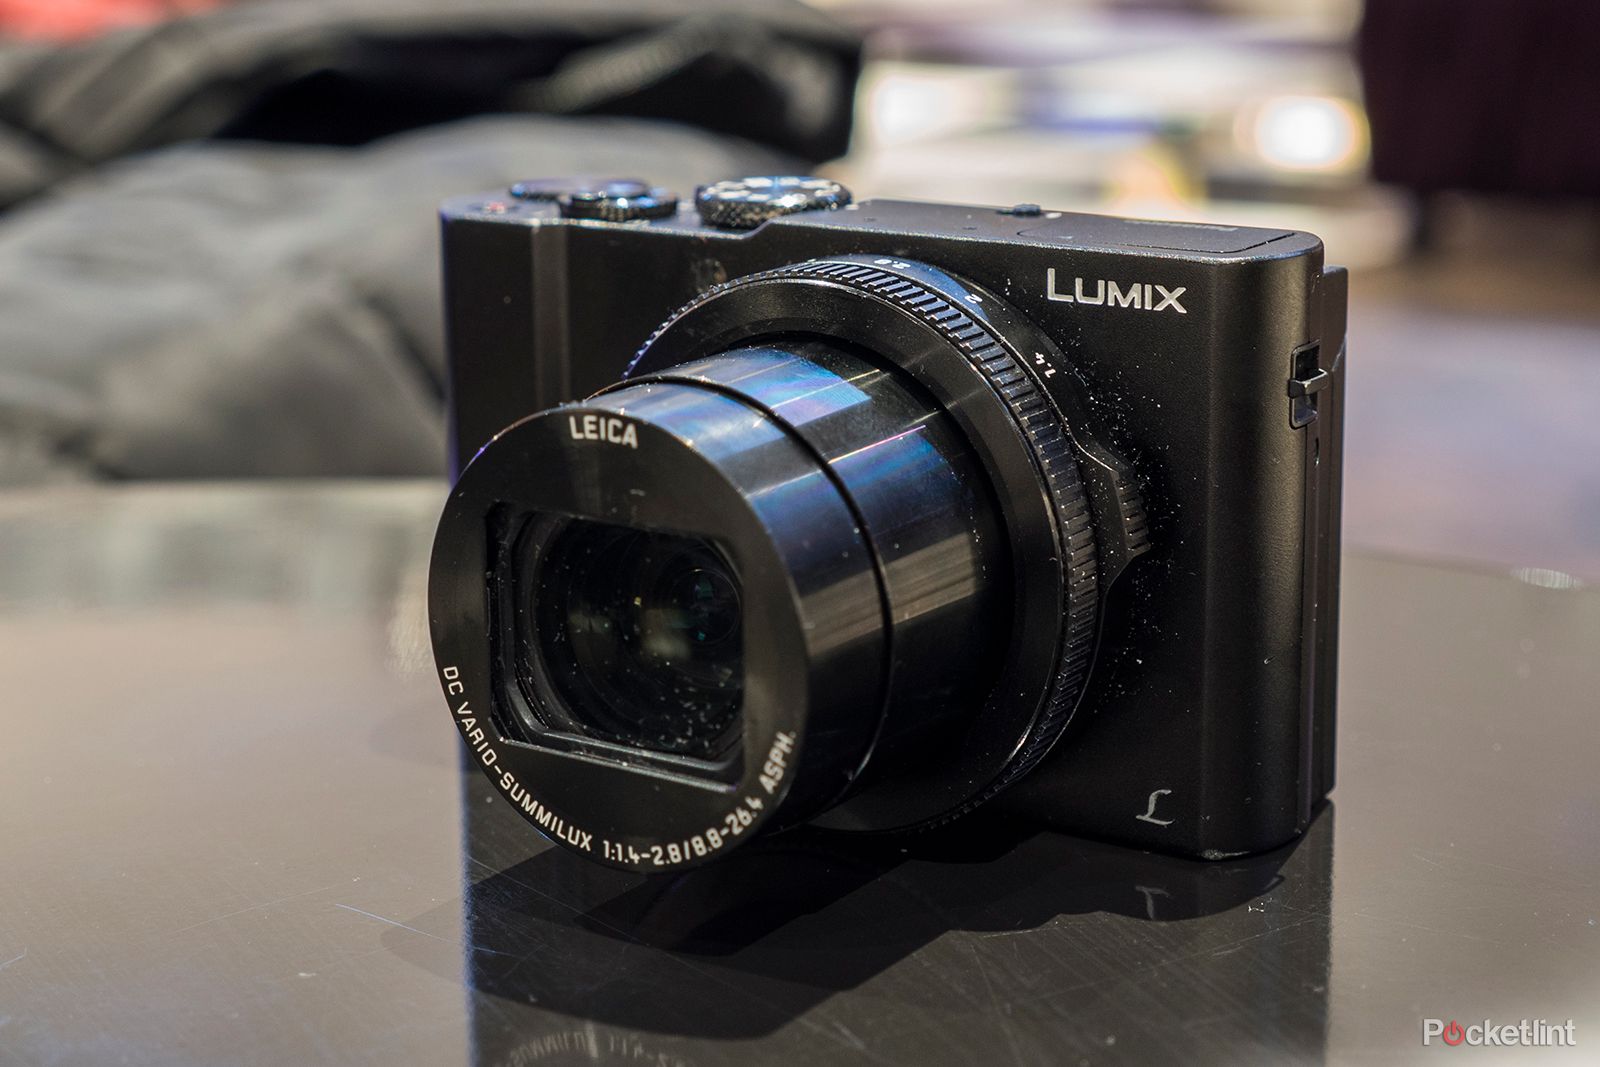 slim Steil blauwe vinvis Panasonic Lumix LX10 / LX15 review: The best high-end compact camera money  can buy?